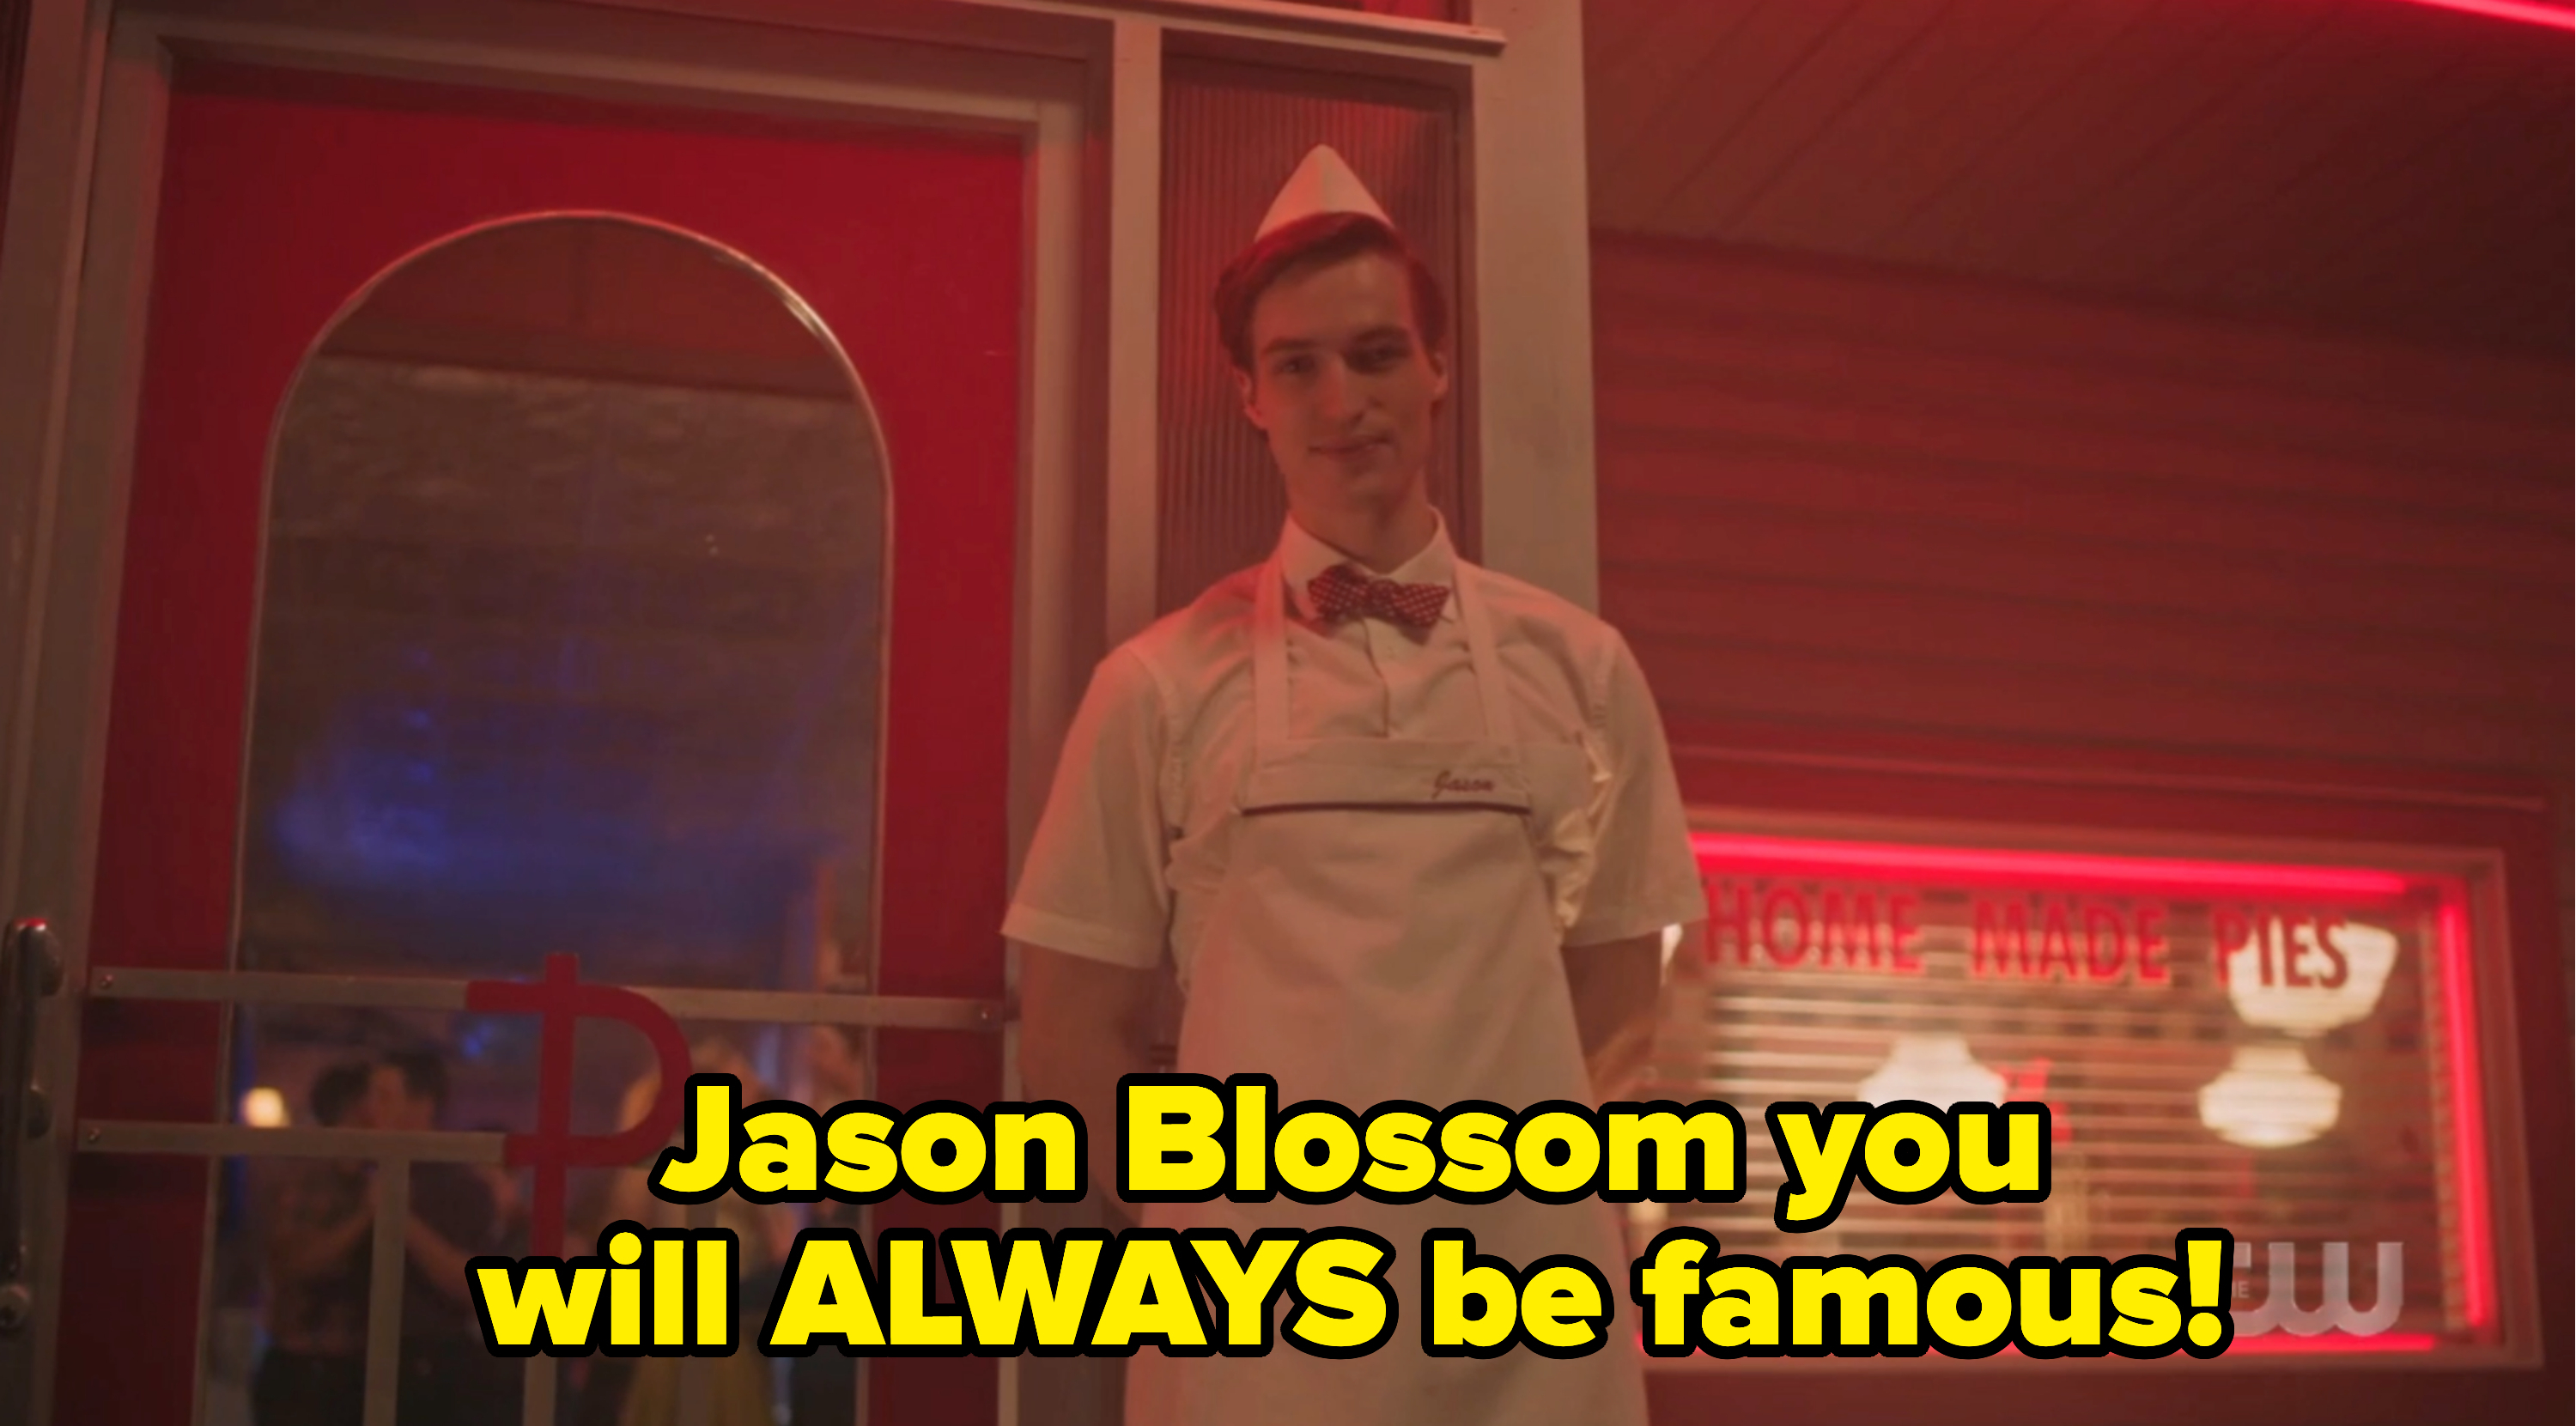 Jason Blossom with the caption you will always be famous